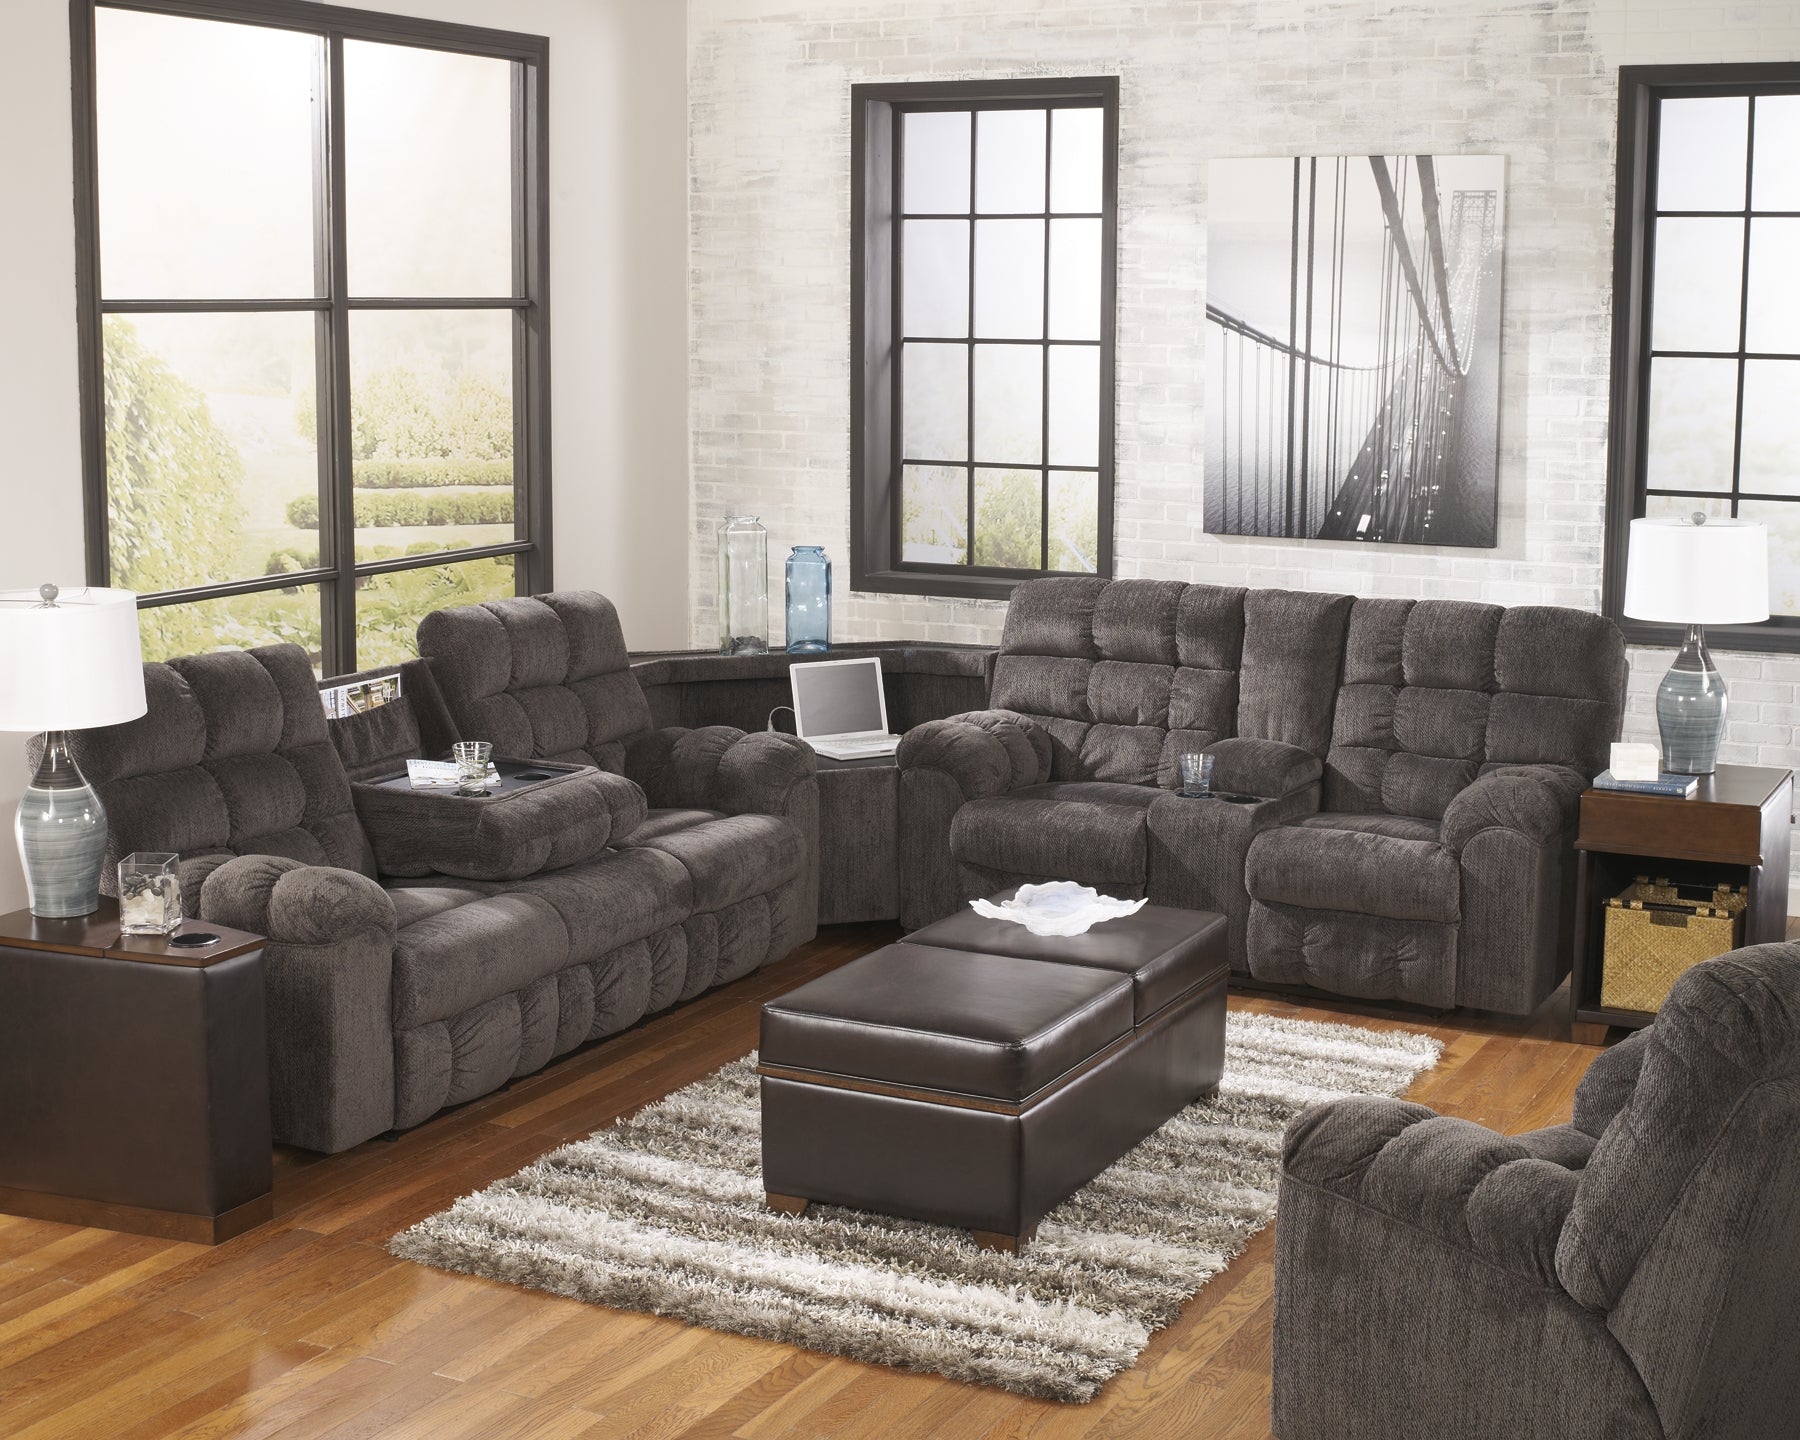 Acieona 3-Piece Reclining Sectional Rent Wise Rent To Own Jacksonville, Florida